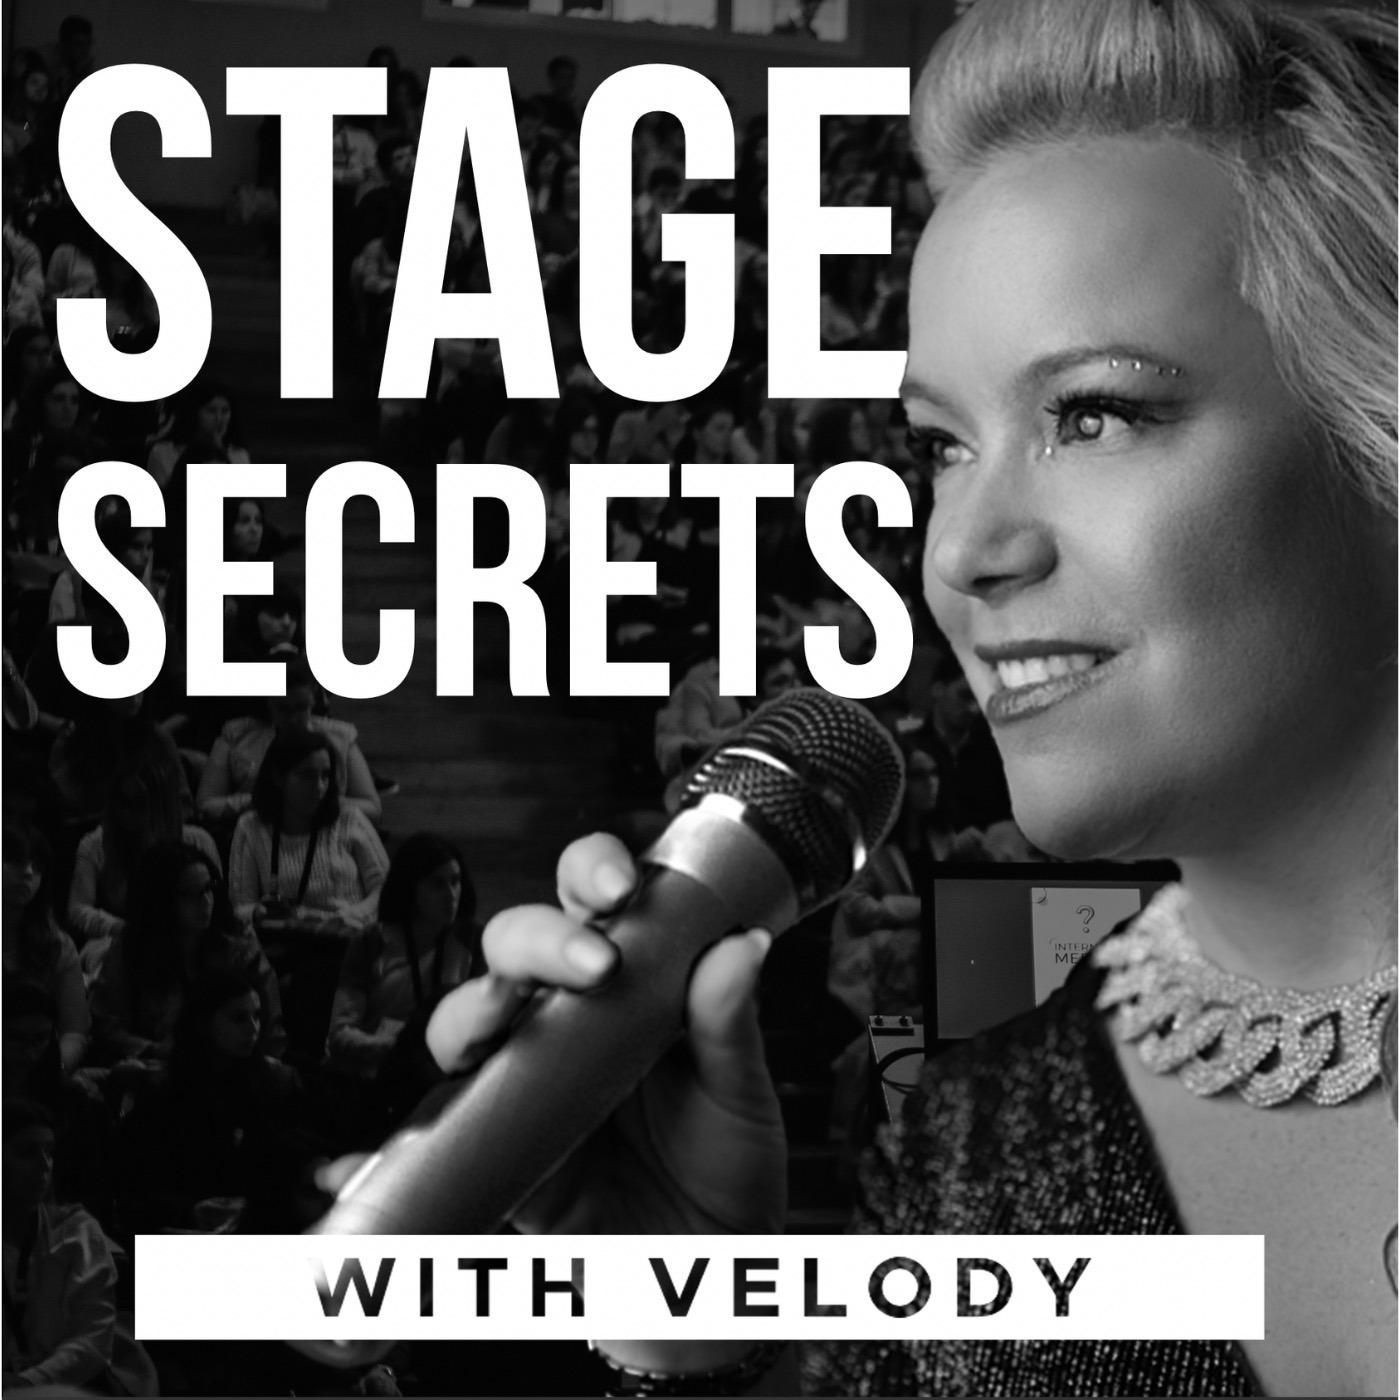 Stage Secrets with Velody